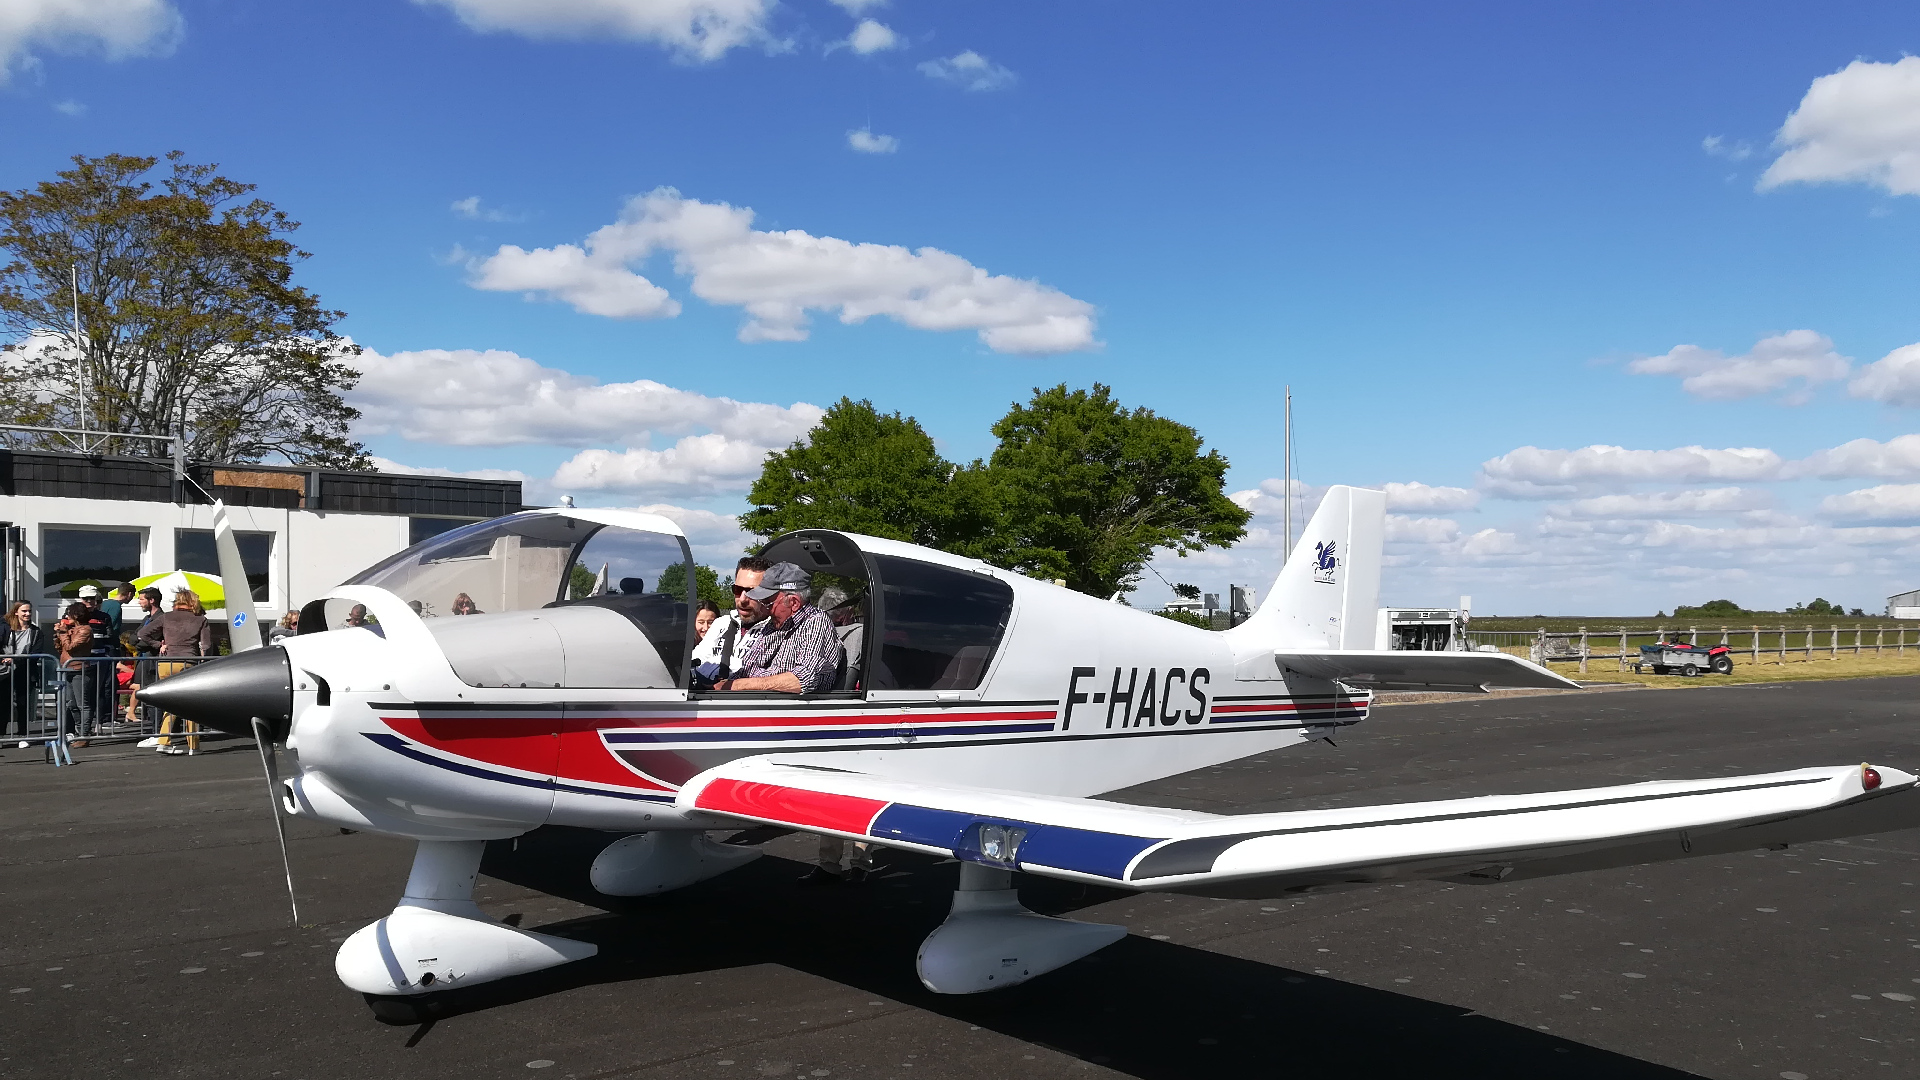 Get ready for a discovery flight with Saumur Air Club